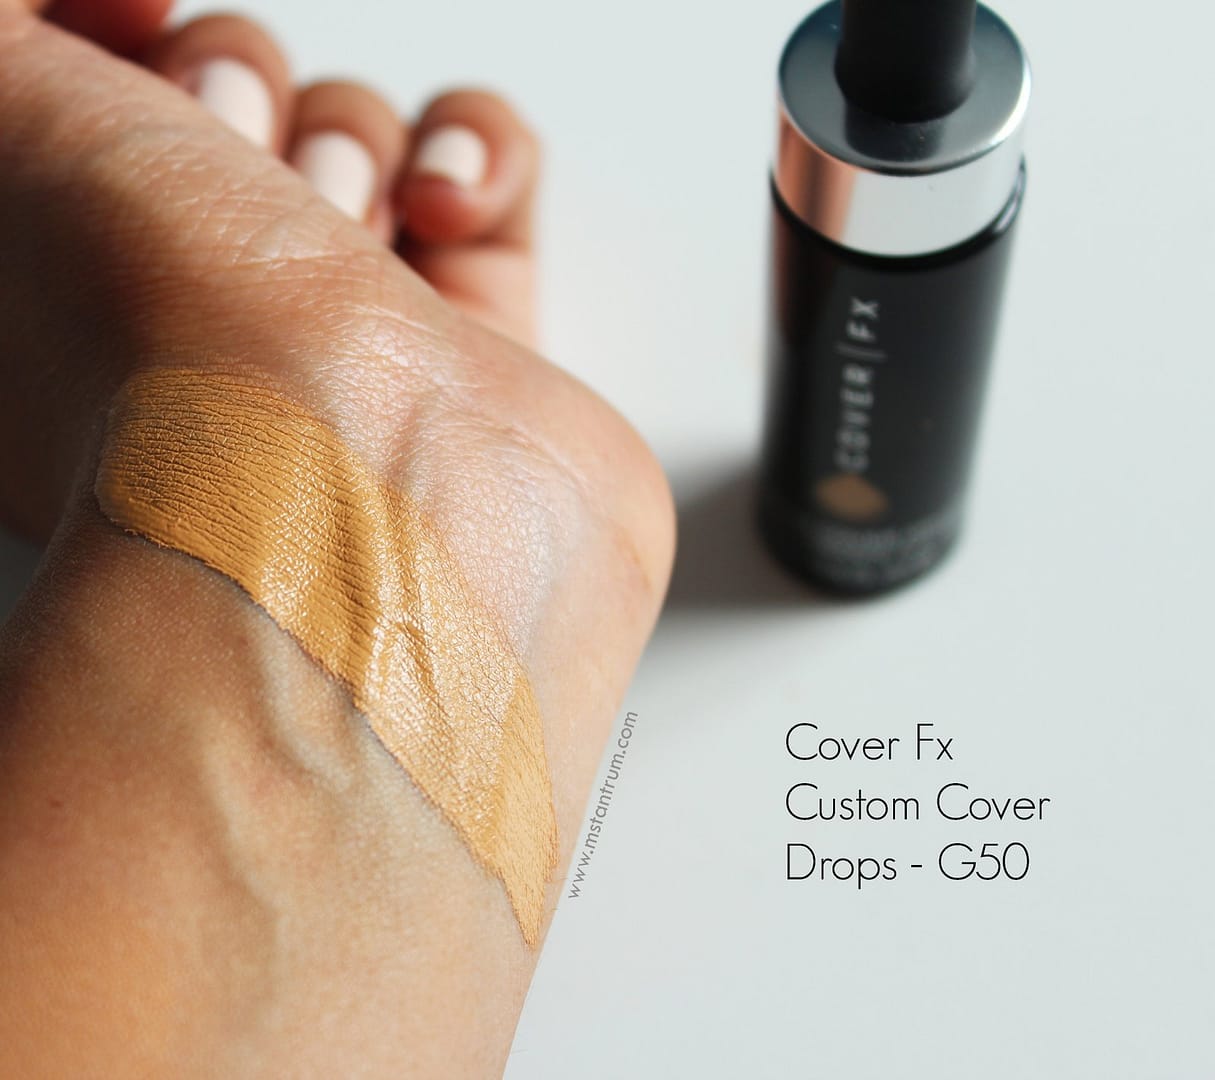 Cover Fx Custom Cover Drops Review + Swatches of G50